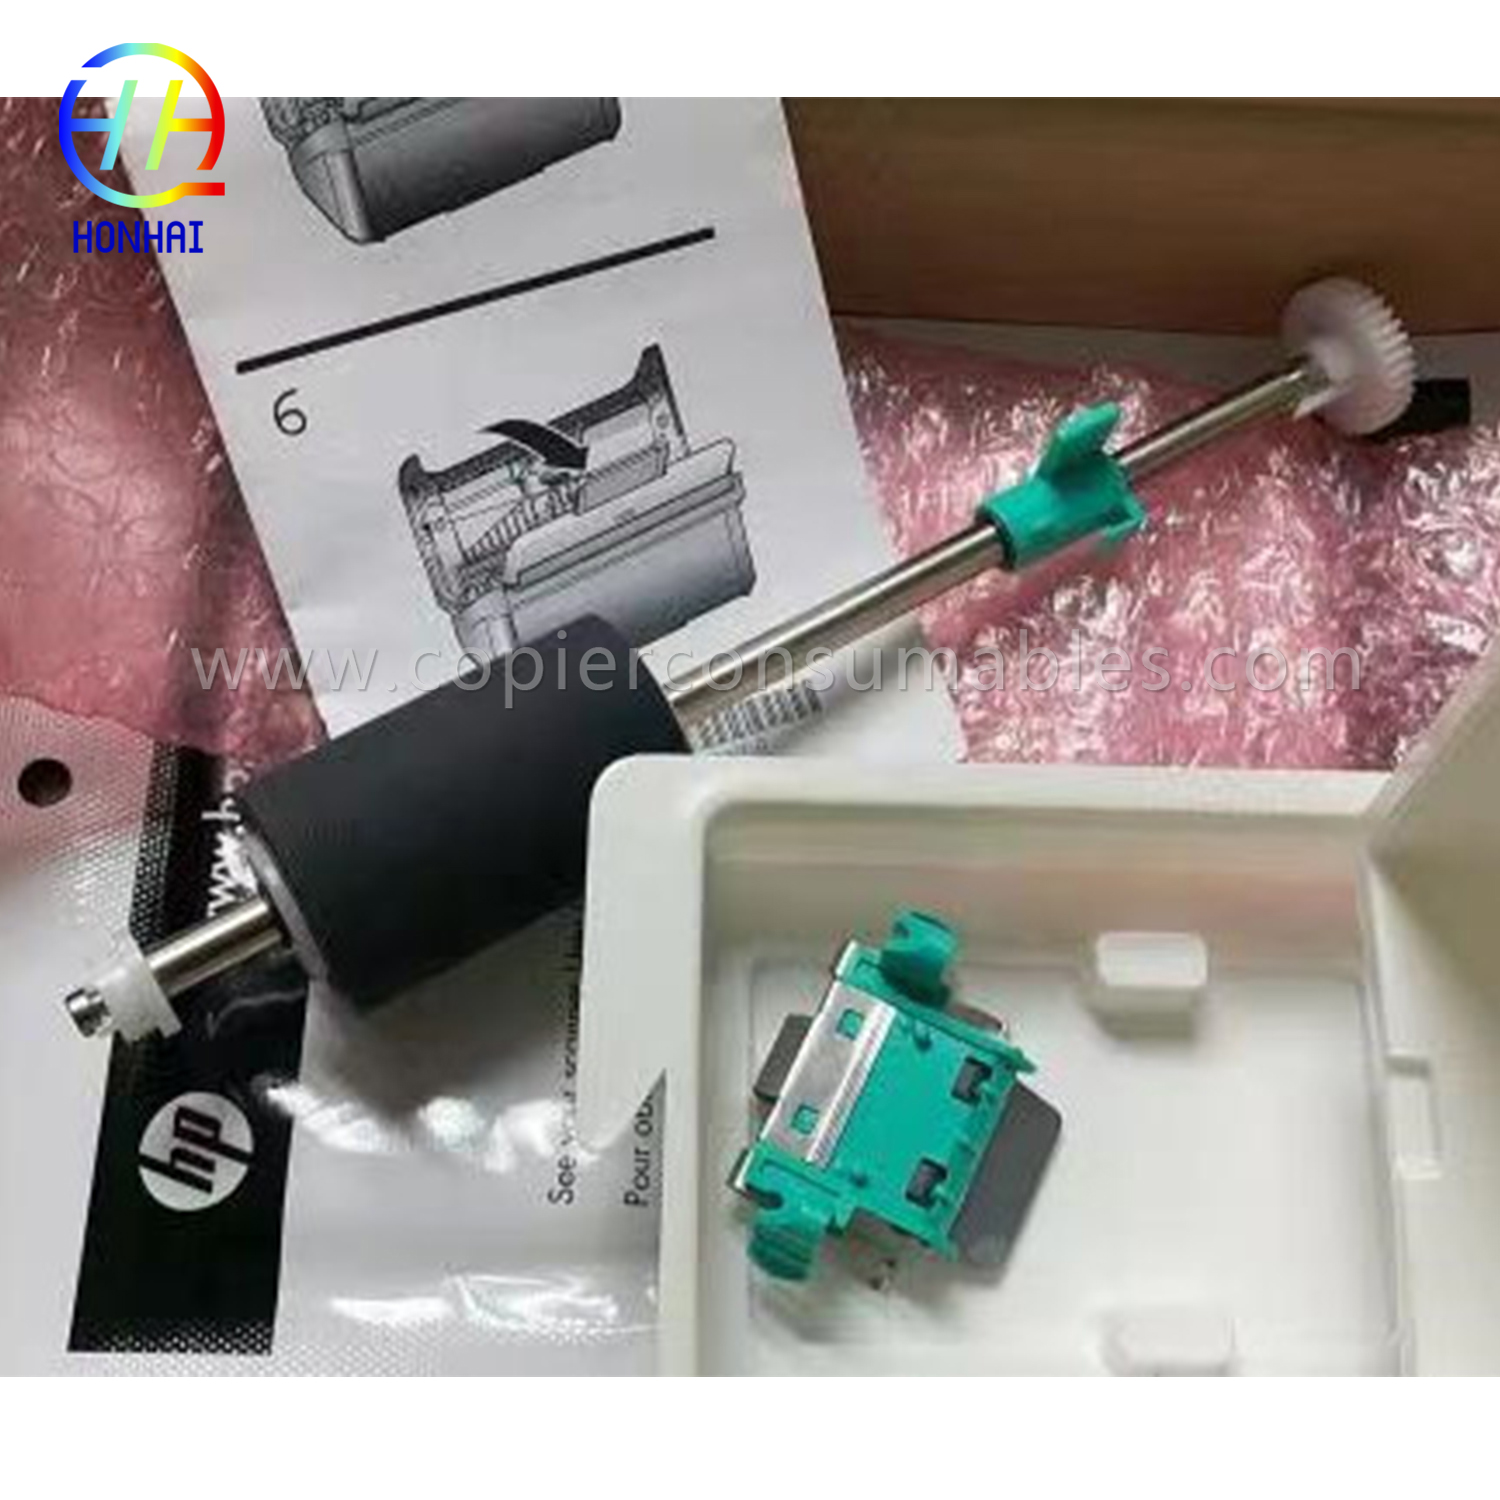 Adf Maintenance Kit for HP Scanjet 3000 S2 L2724A (1) 拷贝